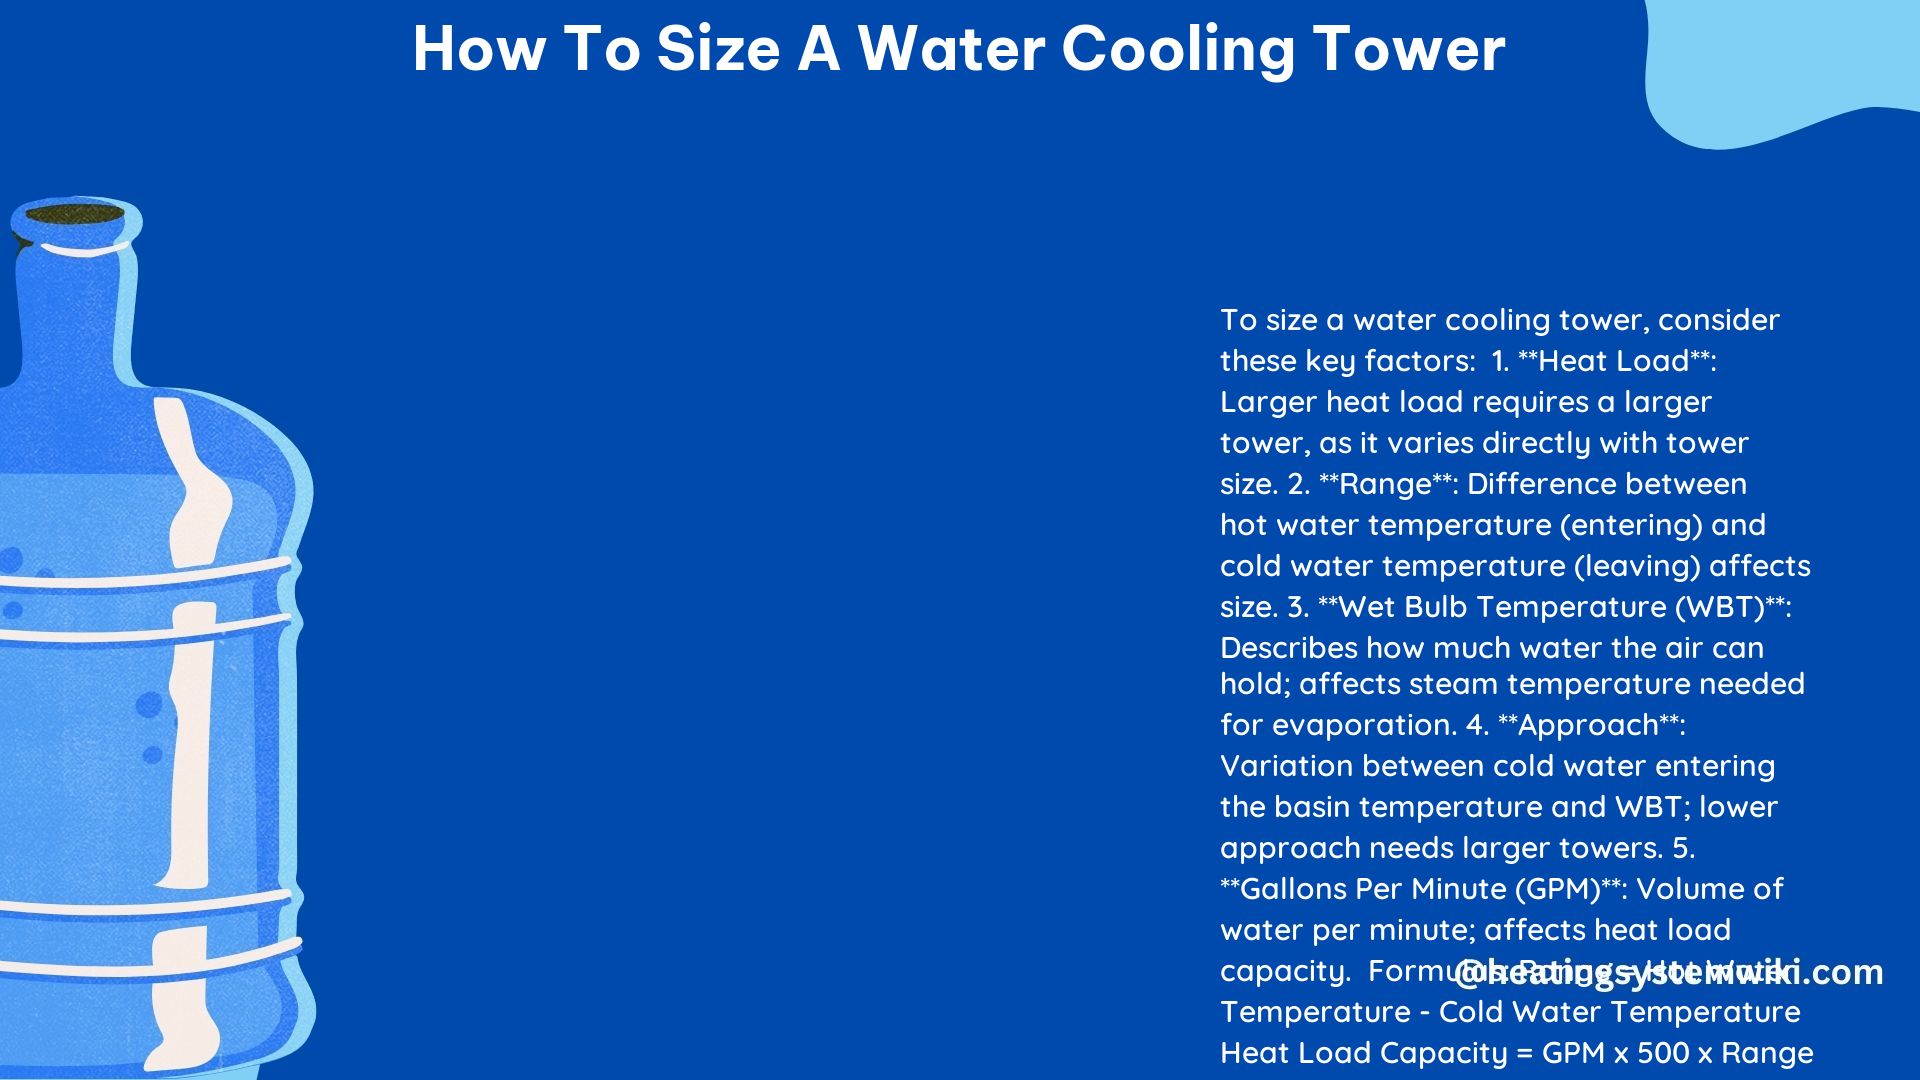 How to Size a Water Cooling Tower